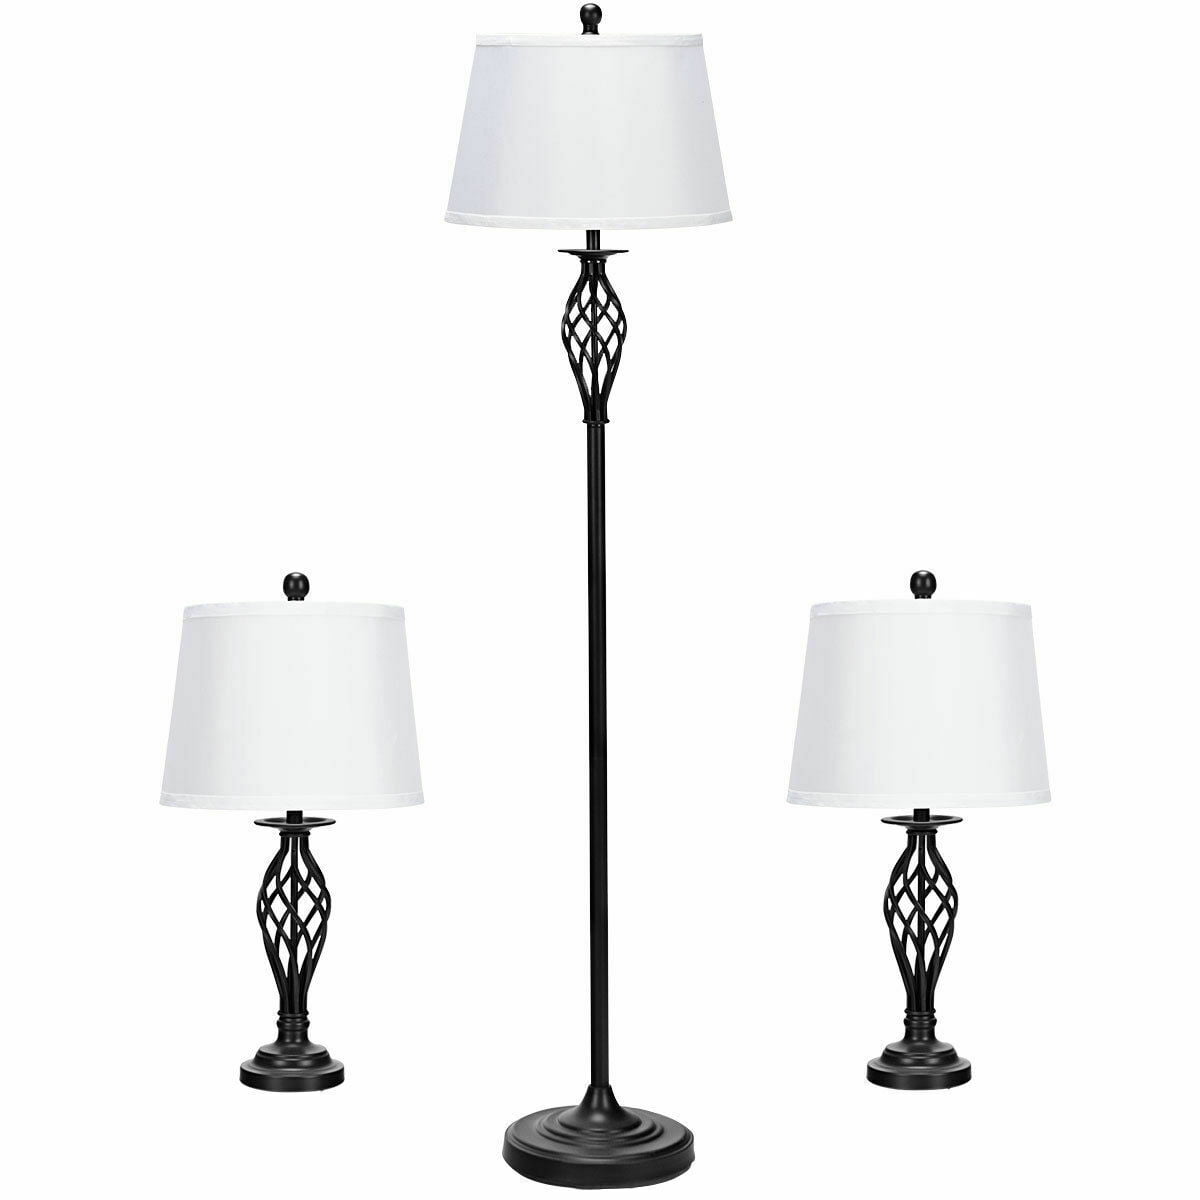 3 Piece Lamp Set 2 Table Lamps 1 Floor Lamp Fabric Shades for Living ...